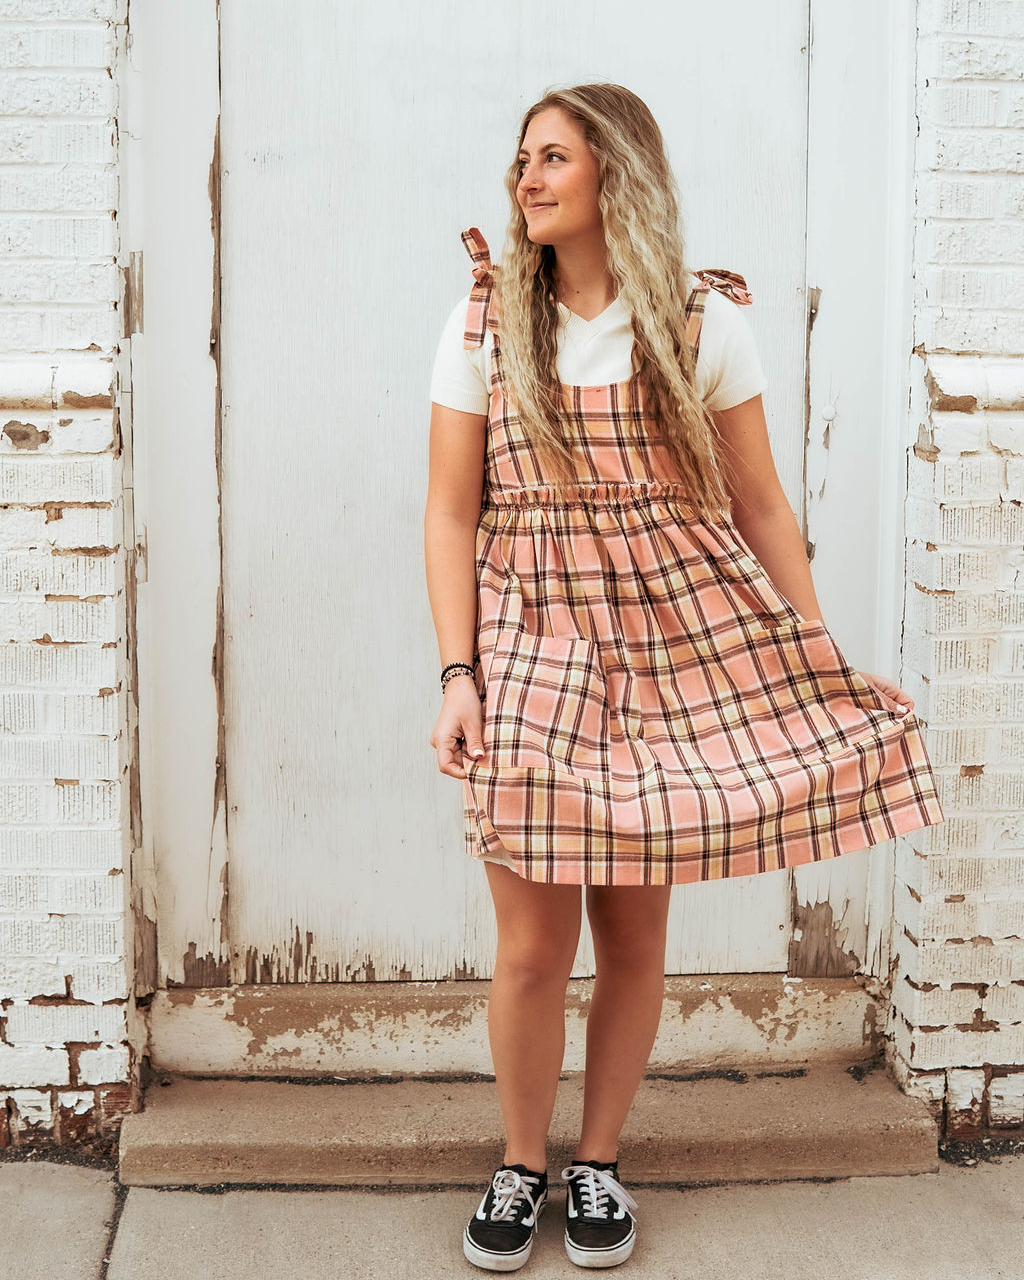 Cute pink plaid babydoll dress for spring